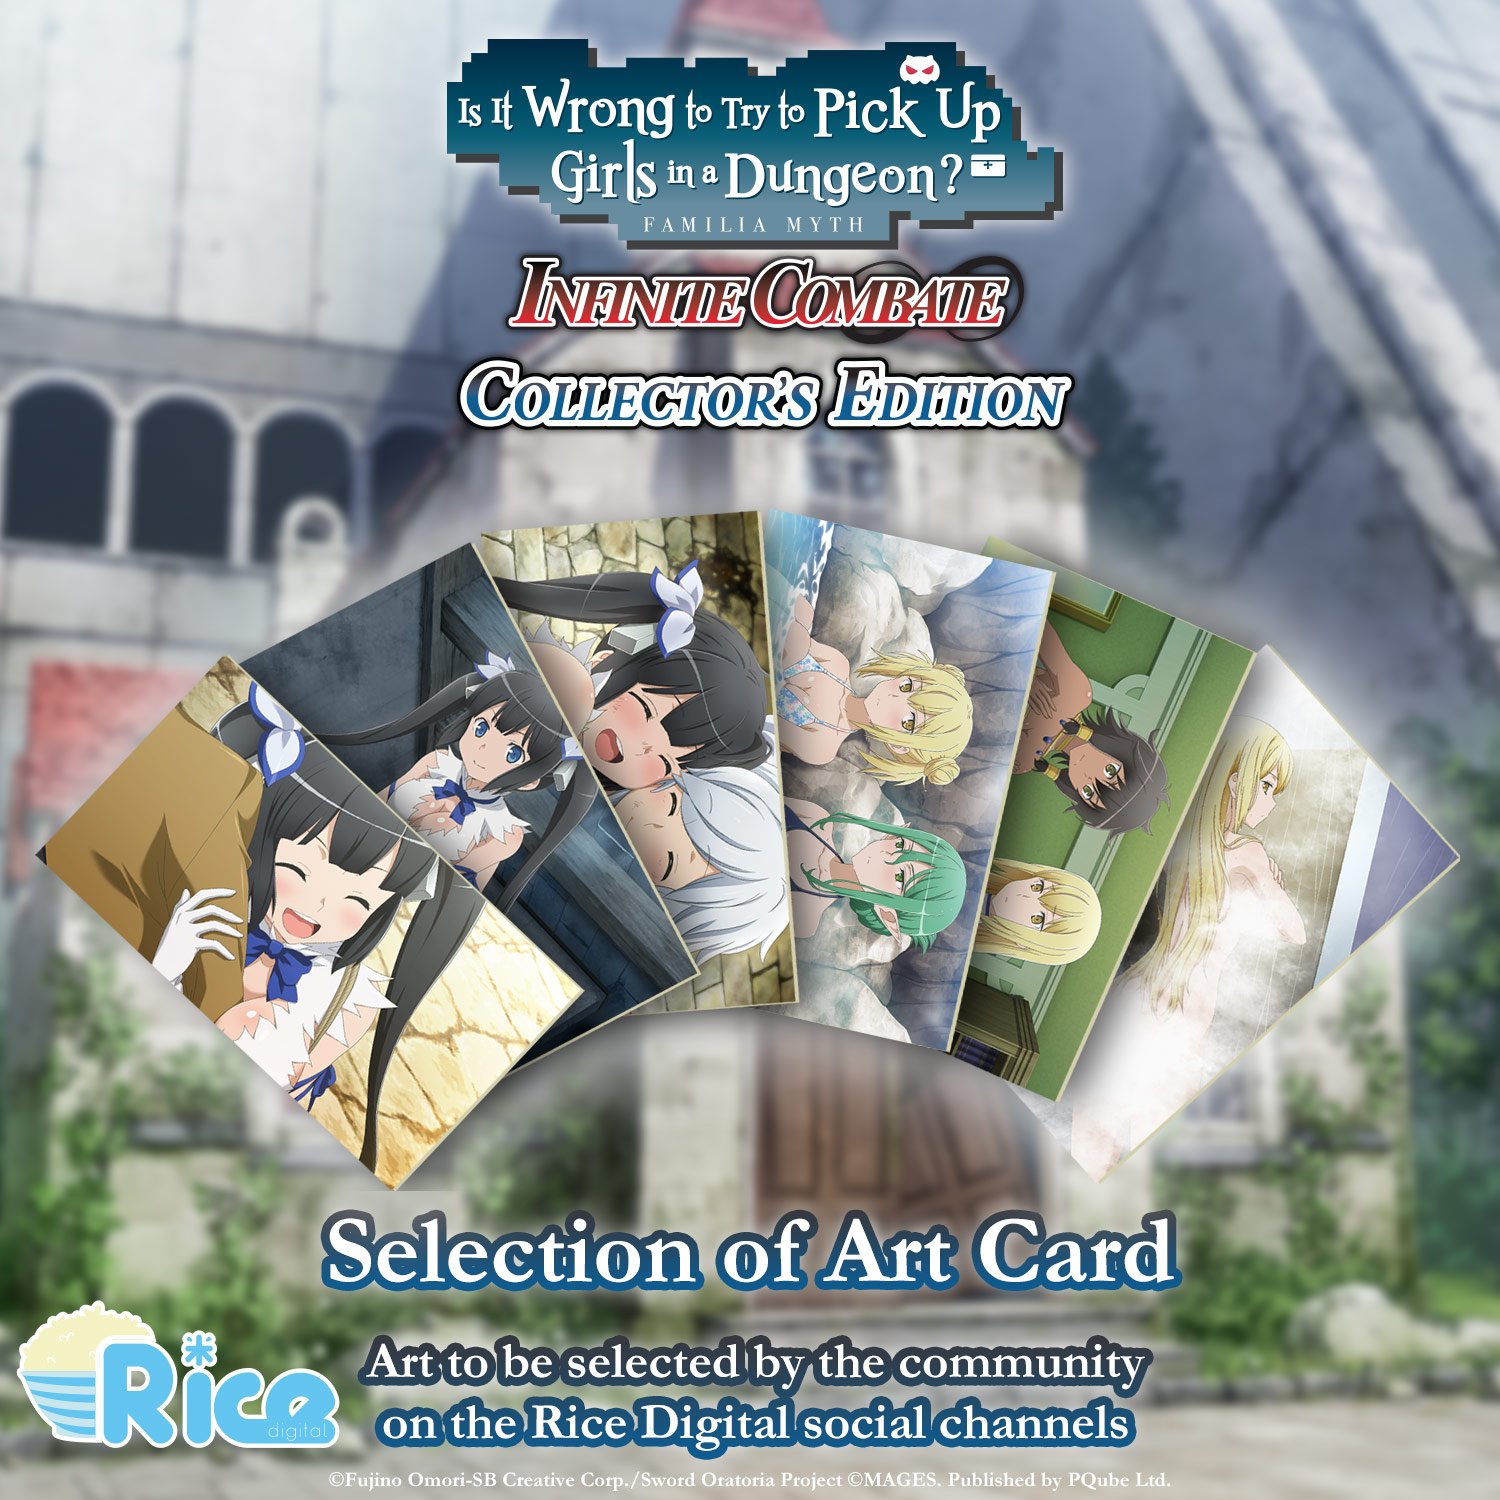 Danmachi: Infinite Combate/PC Gameplay - Part 119- Go Out Event